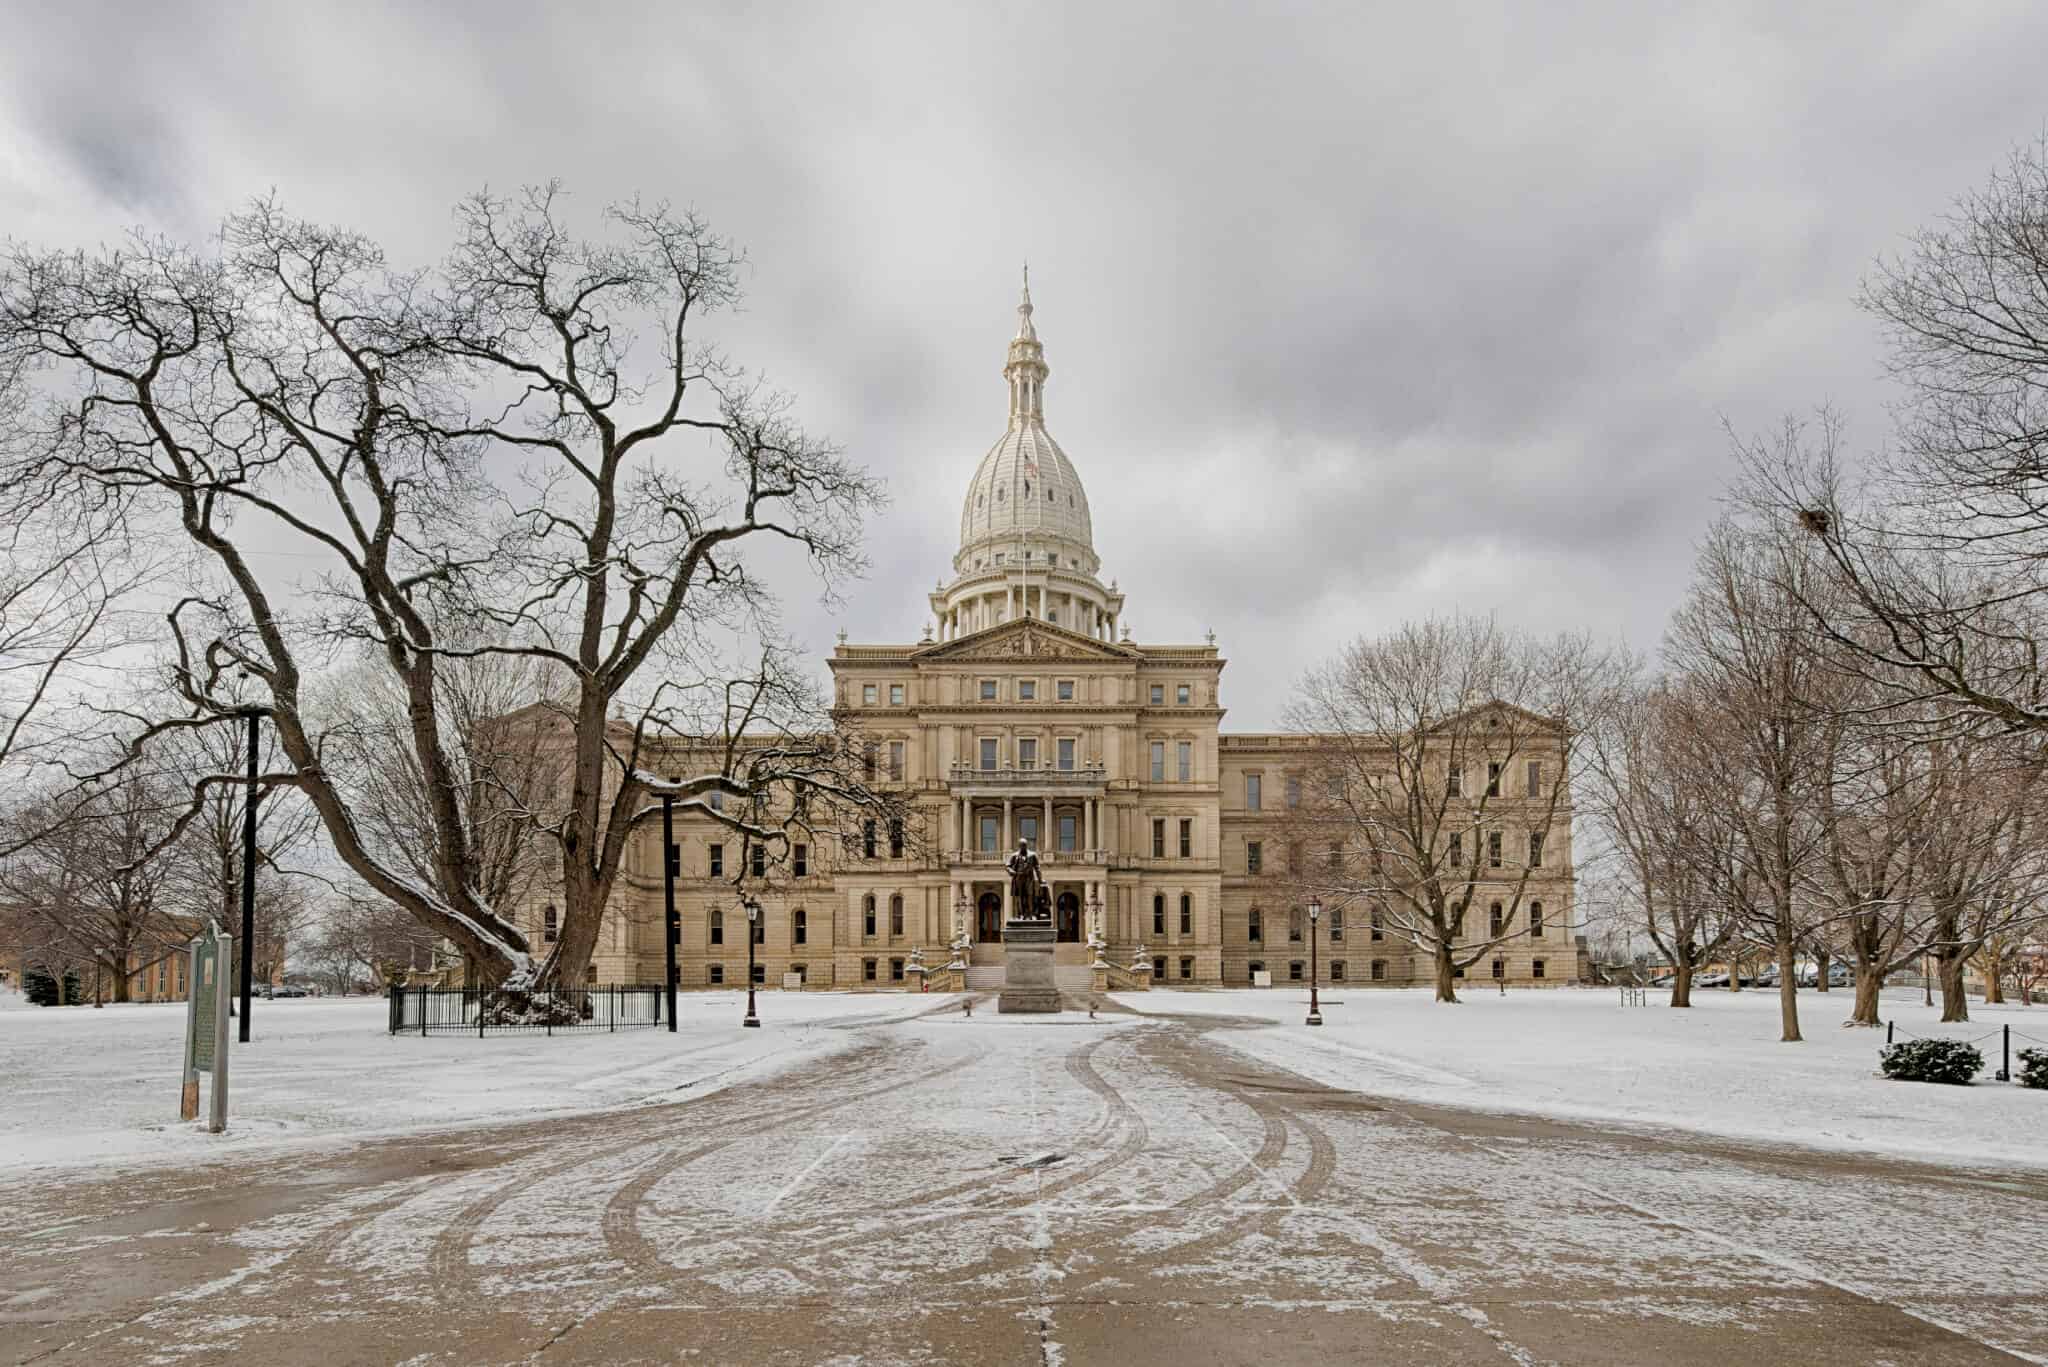 Exterior of the Michigan State Capitol building in Winter at 115 W Allegan Street in Lansing, Michigan on January 14, 2013. This photograph consists of three exposures blended together using HDR Efex Pro2 software to create a high dynamic range (HDR) image.